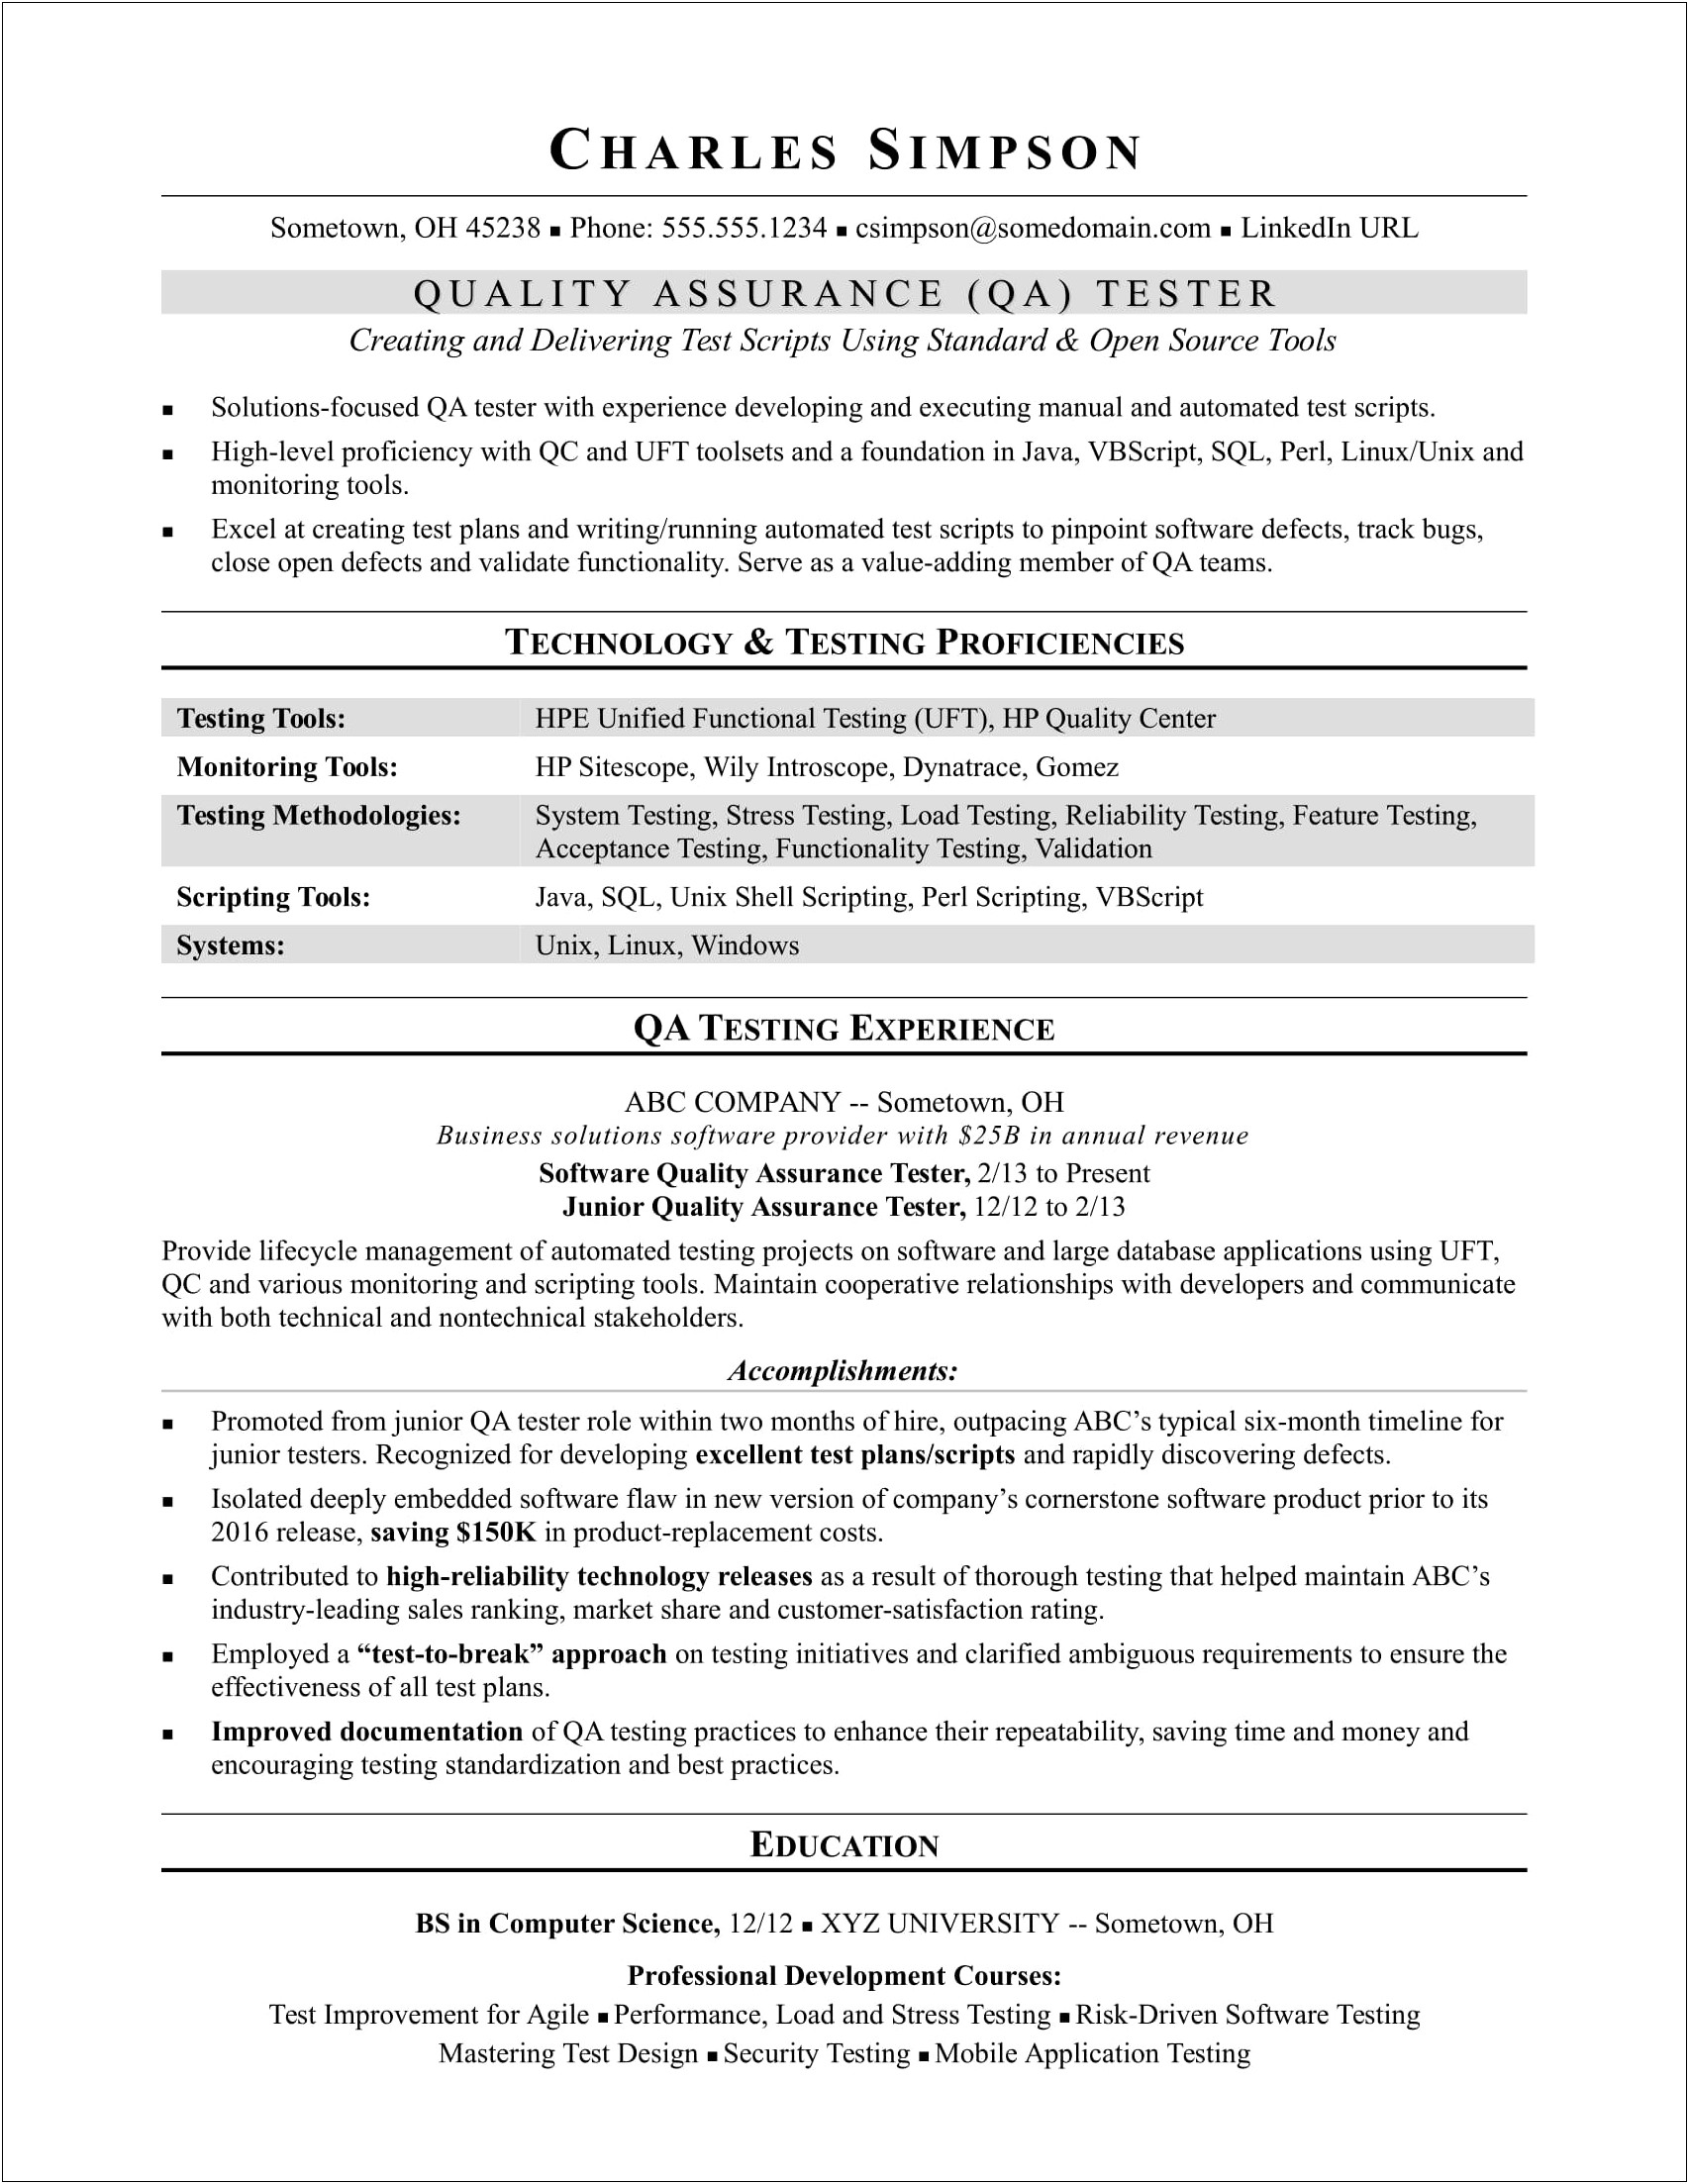 Manual Testing Resume For 2 Years Experience